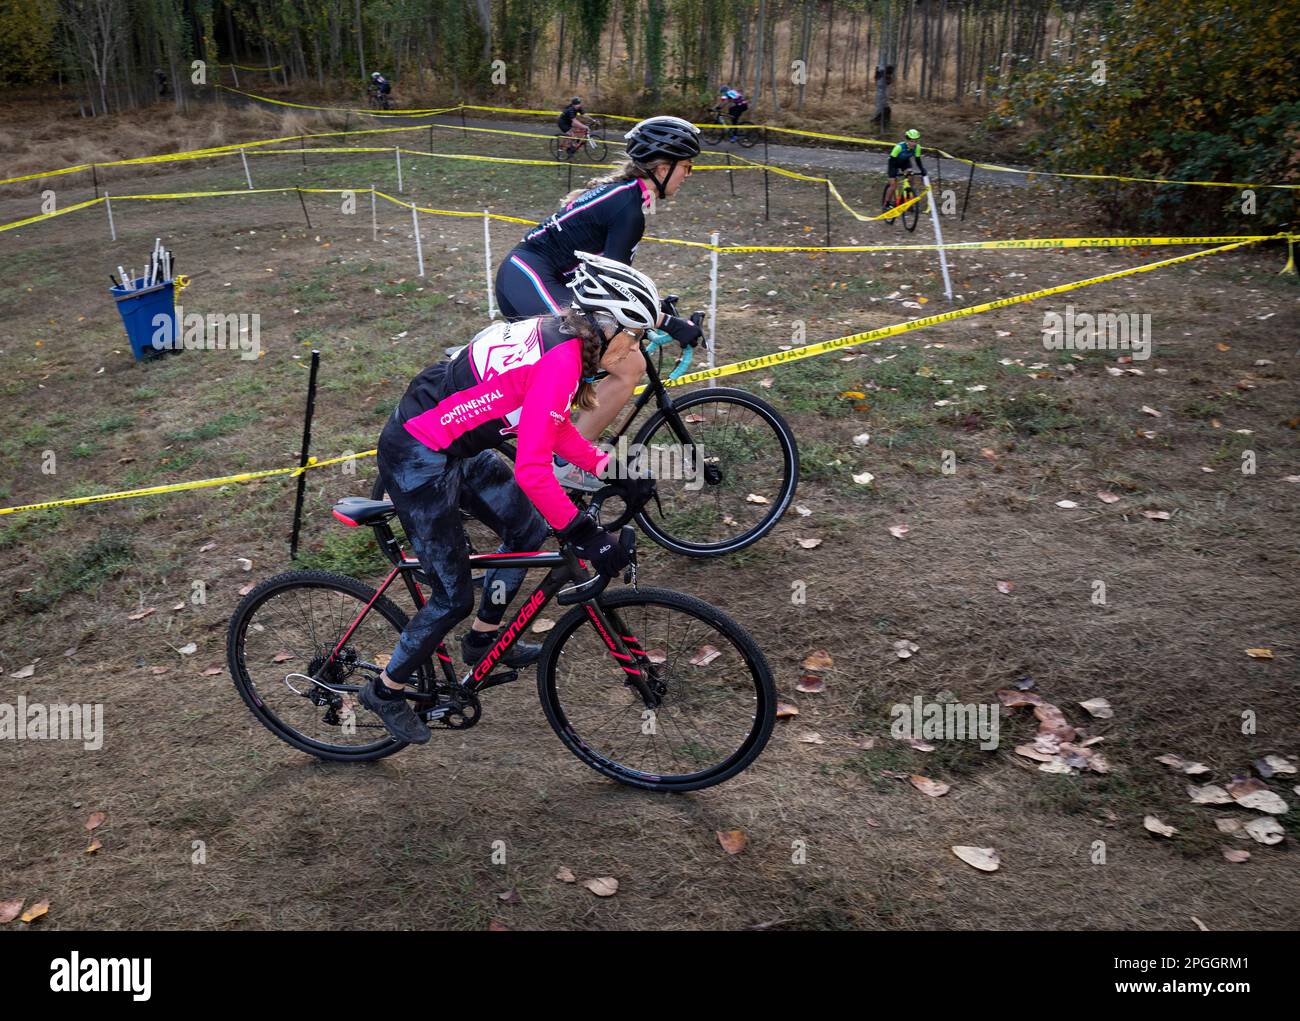 WA24053-00....Washington - Senior citizen Vicky Spring (69) compeating in a cyclocross race in Western Washington. Vicky in pink Stock Photo